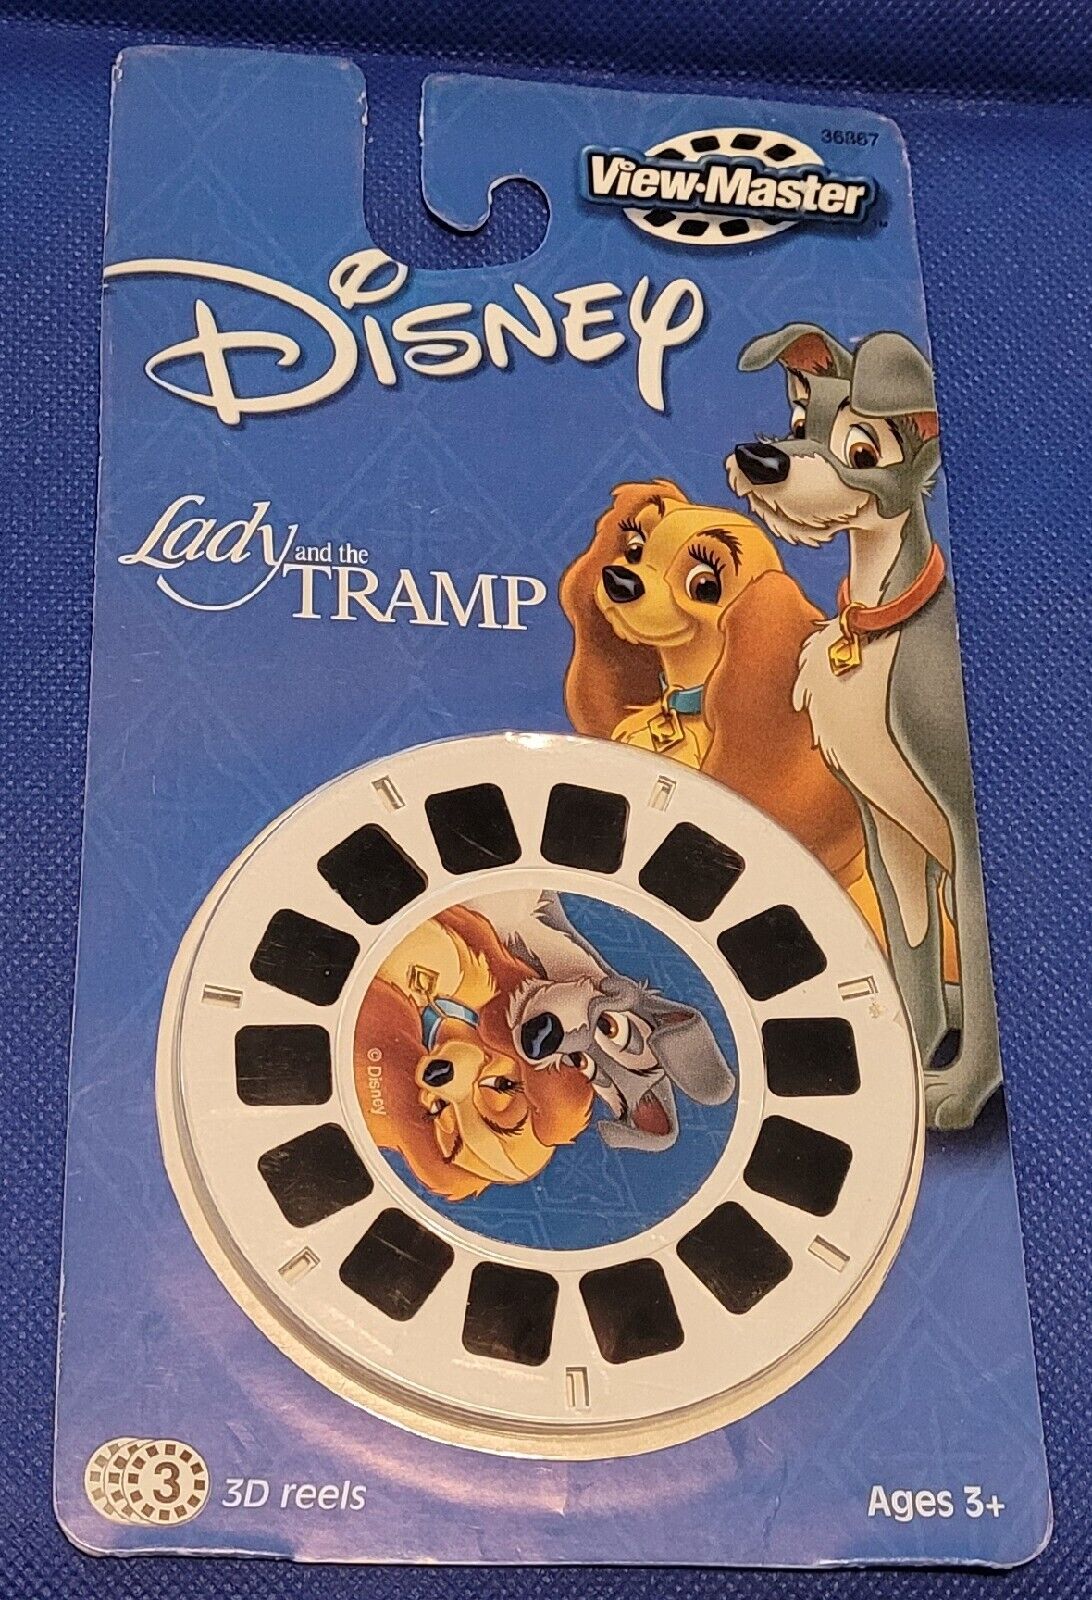 SEALED Disney Disney\'s Lady and the Tramp Movie view-master 3 Reels Blister Pack